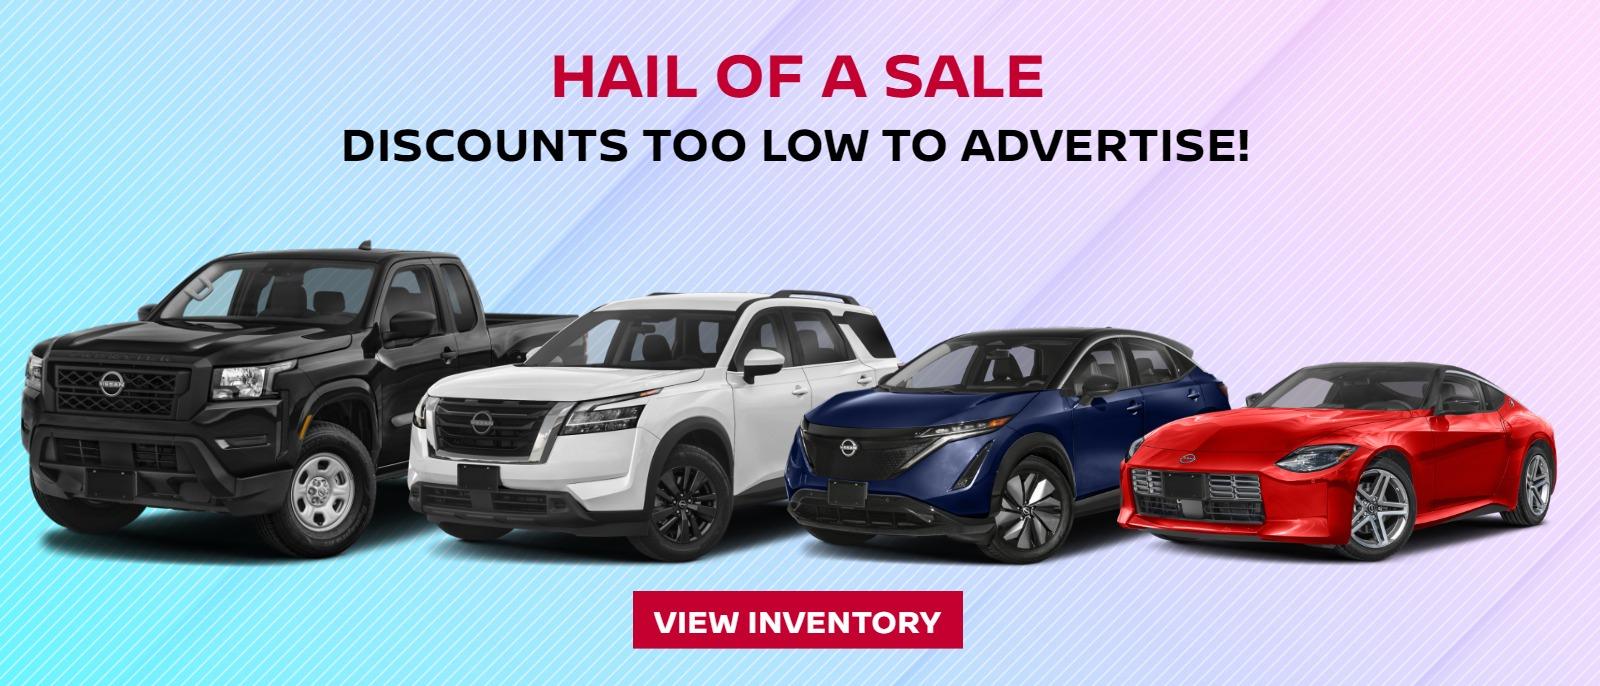 "Hail of a Sale" discounts too low to advertise!